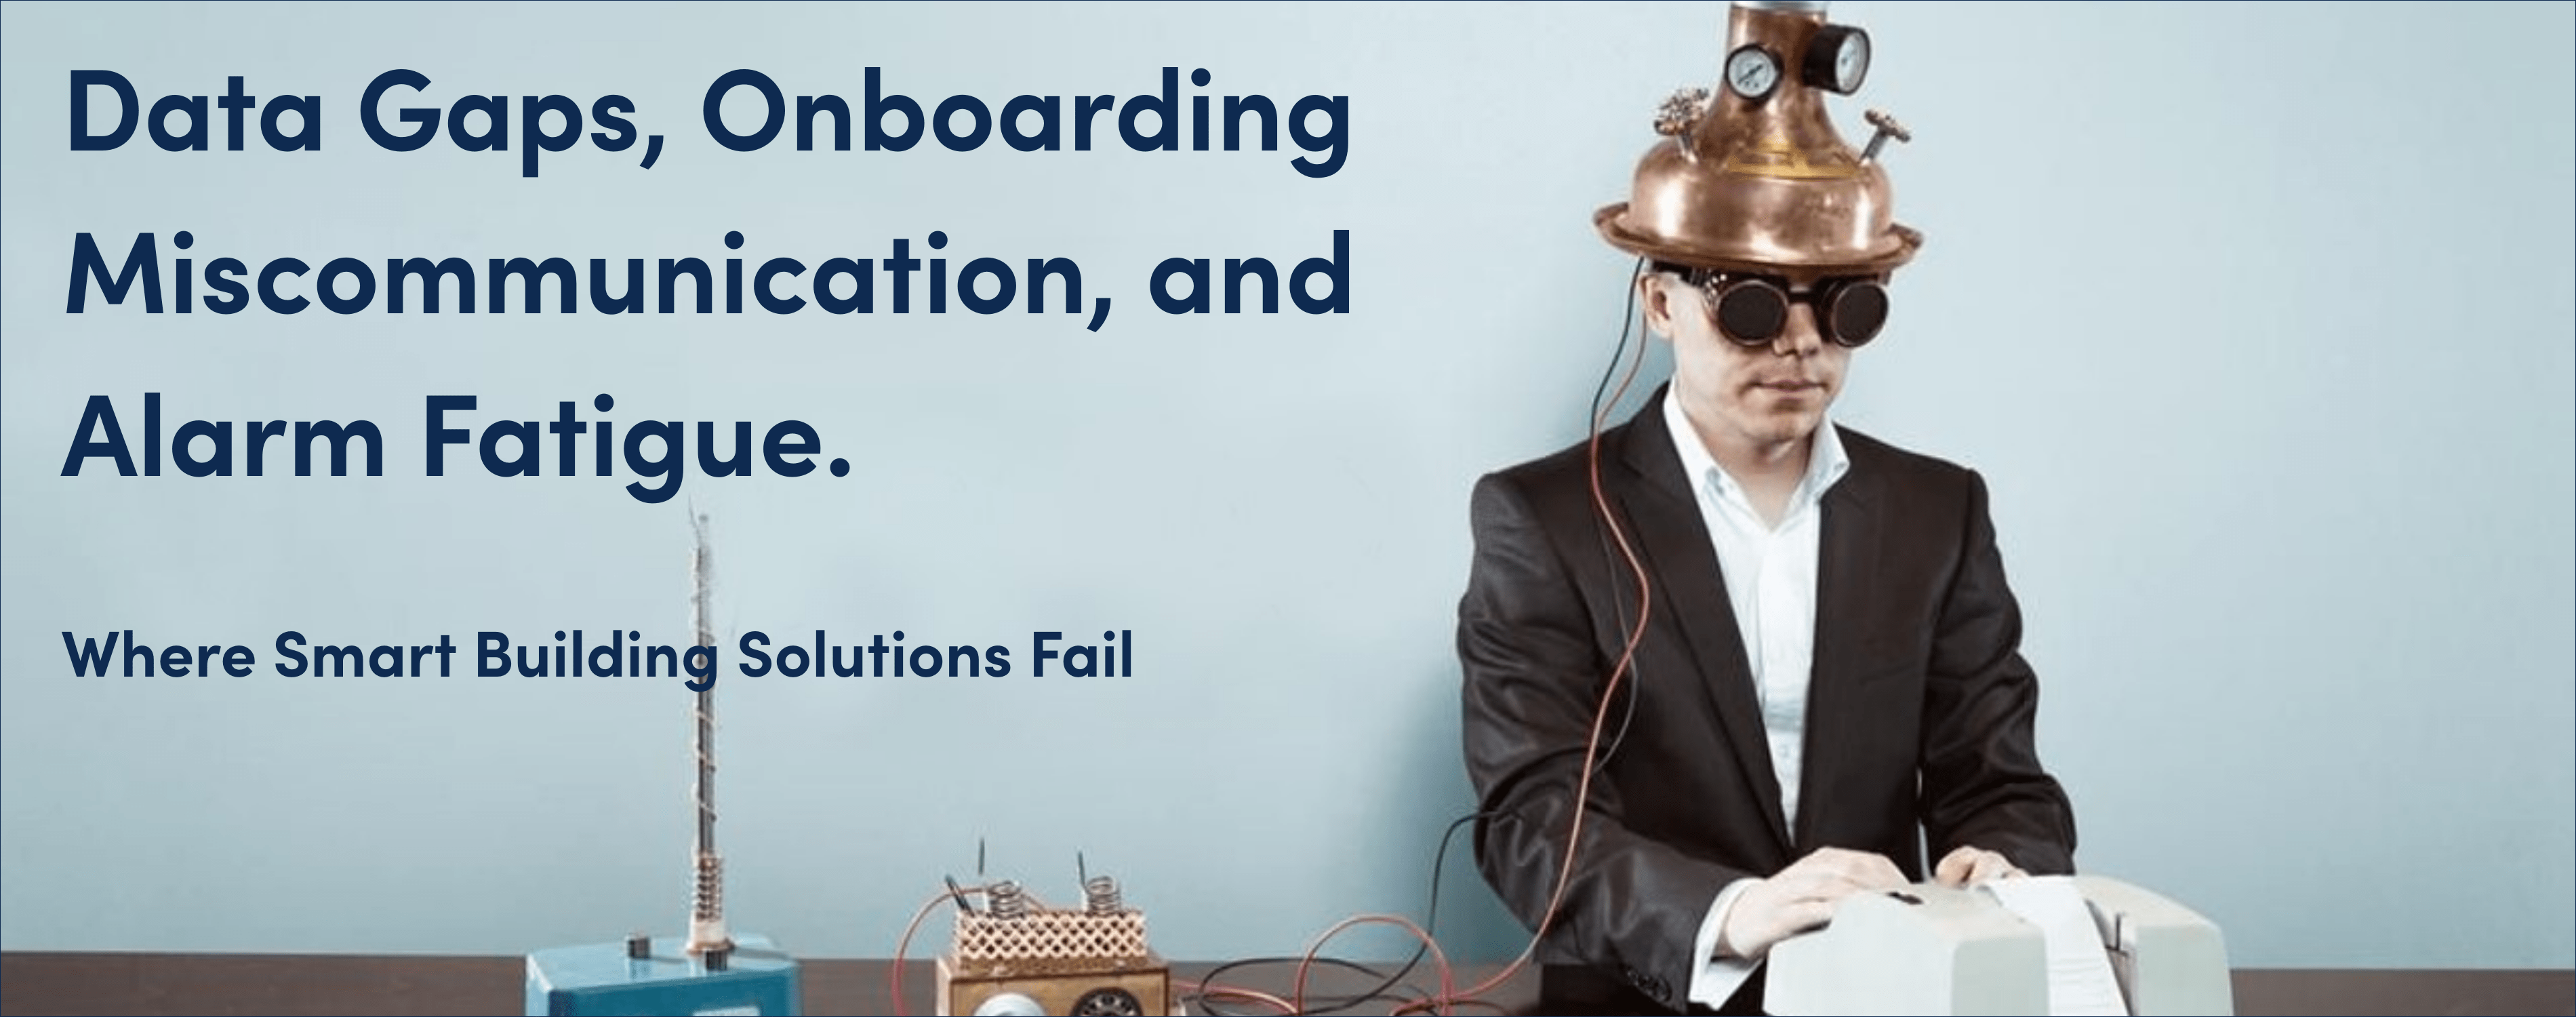 Data Gaps, Onboarding Miscommunication, and Alarm Fatigue. Where Smart Building Solutions Fail